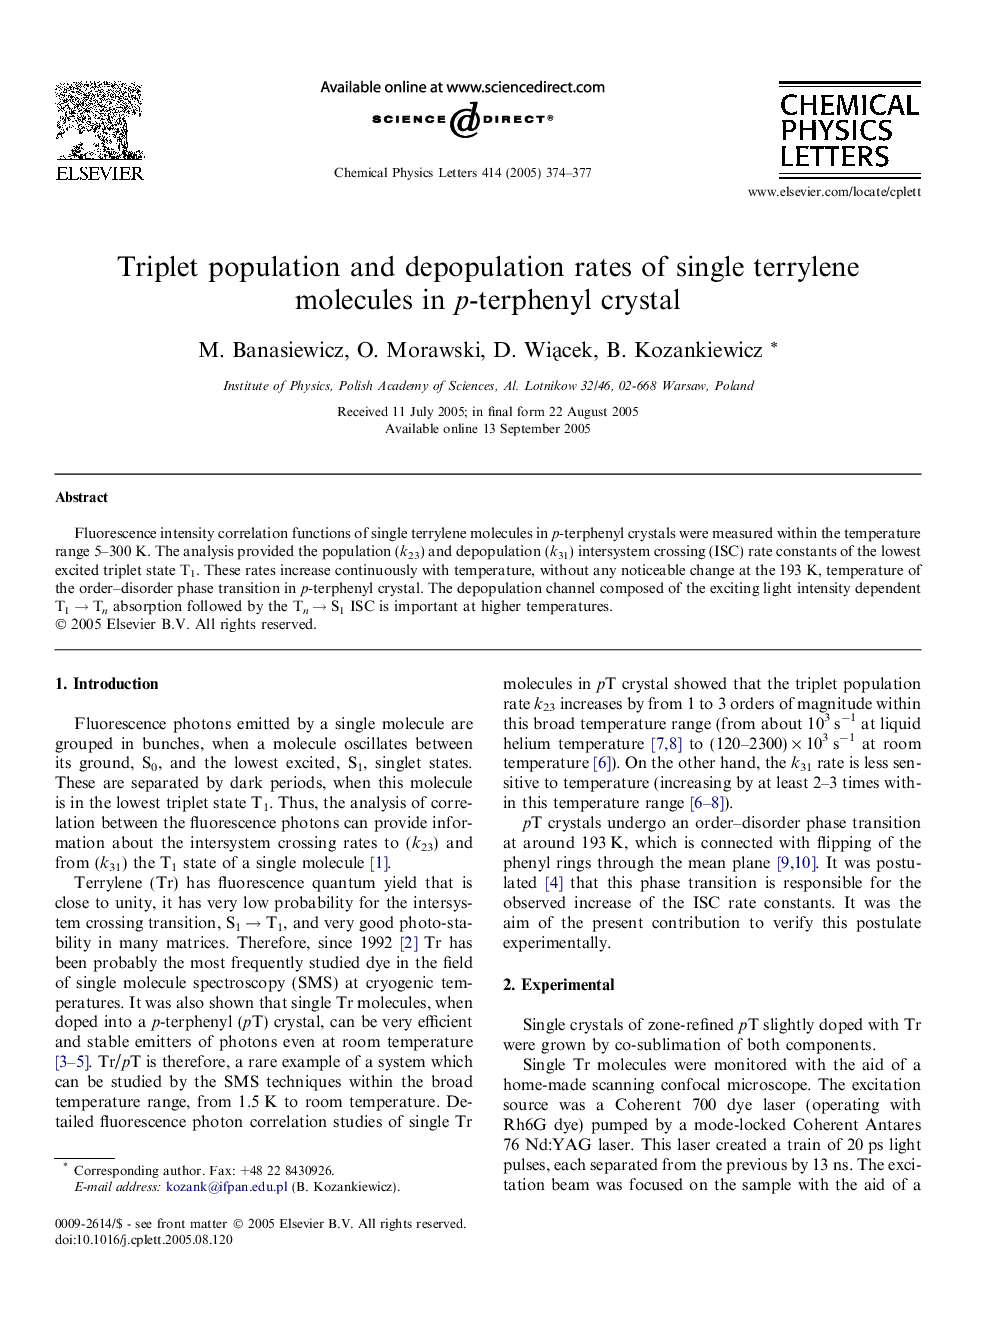 Triplet population and depopulation rates of single terrylene molecules in p-terphenyl crystal